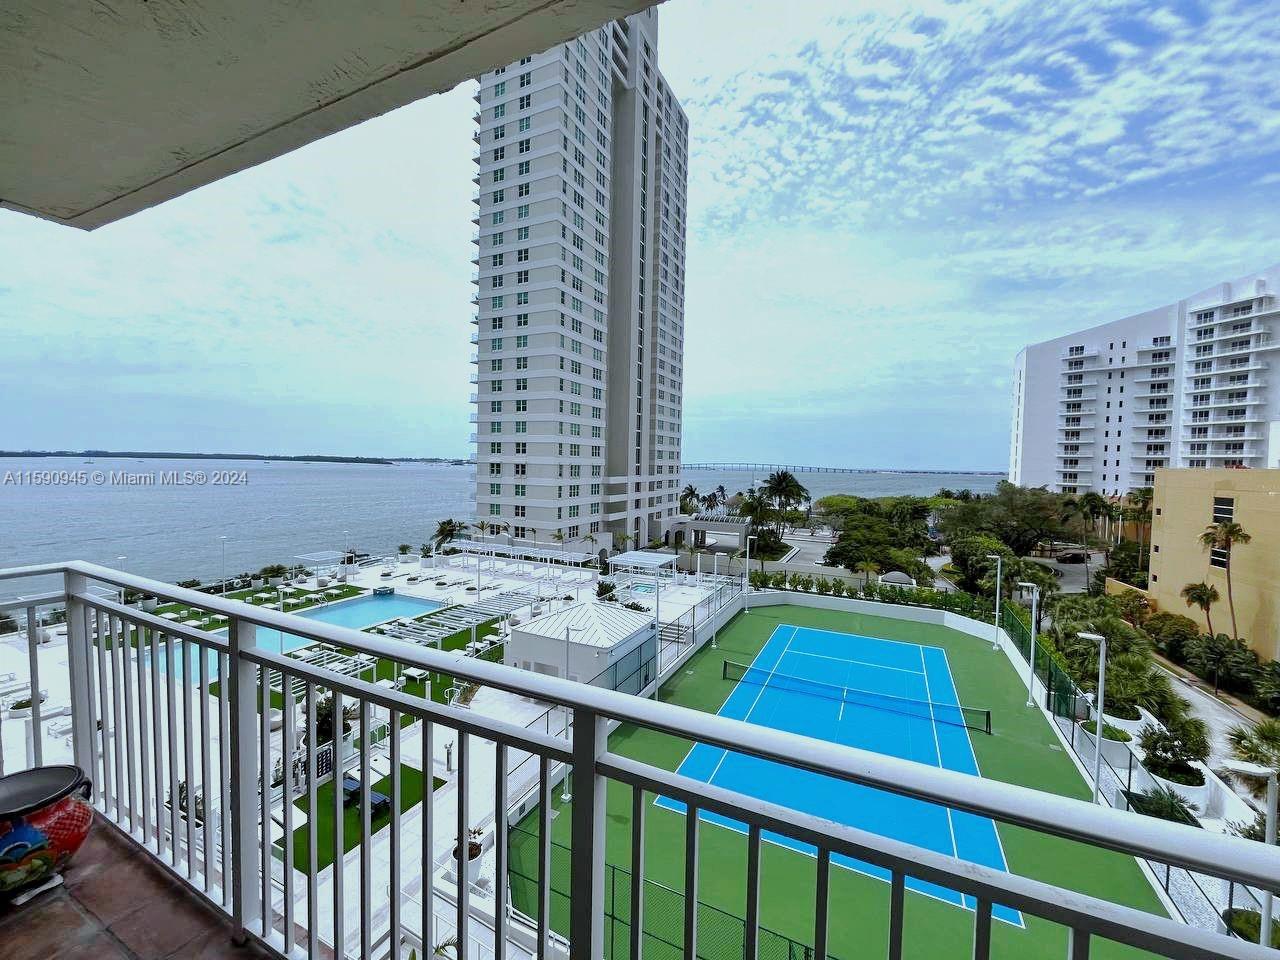 Charming apartment with beautiful water views and lots of character! Spacious rooms and living area filled with potential. Ideal for buyers with a vision to make it their own. Don't miss this opportunity to embrace a luxurious lifestyle in a prime location on Brickell Key, near Miami Airport, restaurants, shops, and more. The pool is currently closed. As per the condo association, it will reopen in Summer. There are two special assessments with a monthly payments of $289,60 for 14 years, the 2nd assessment is already paid in full by the seller! For showing 24hr notice owner-occupied.